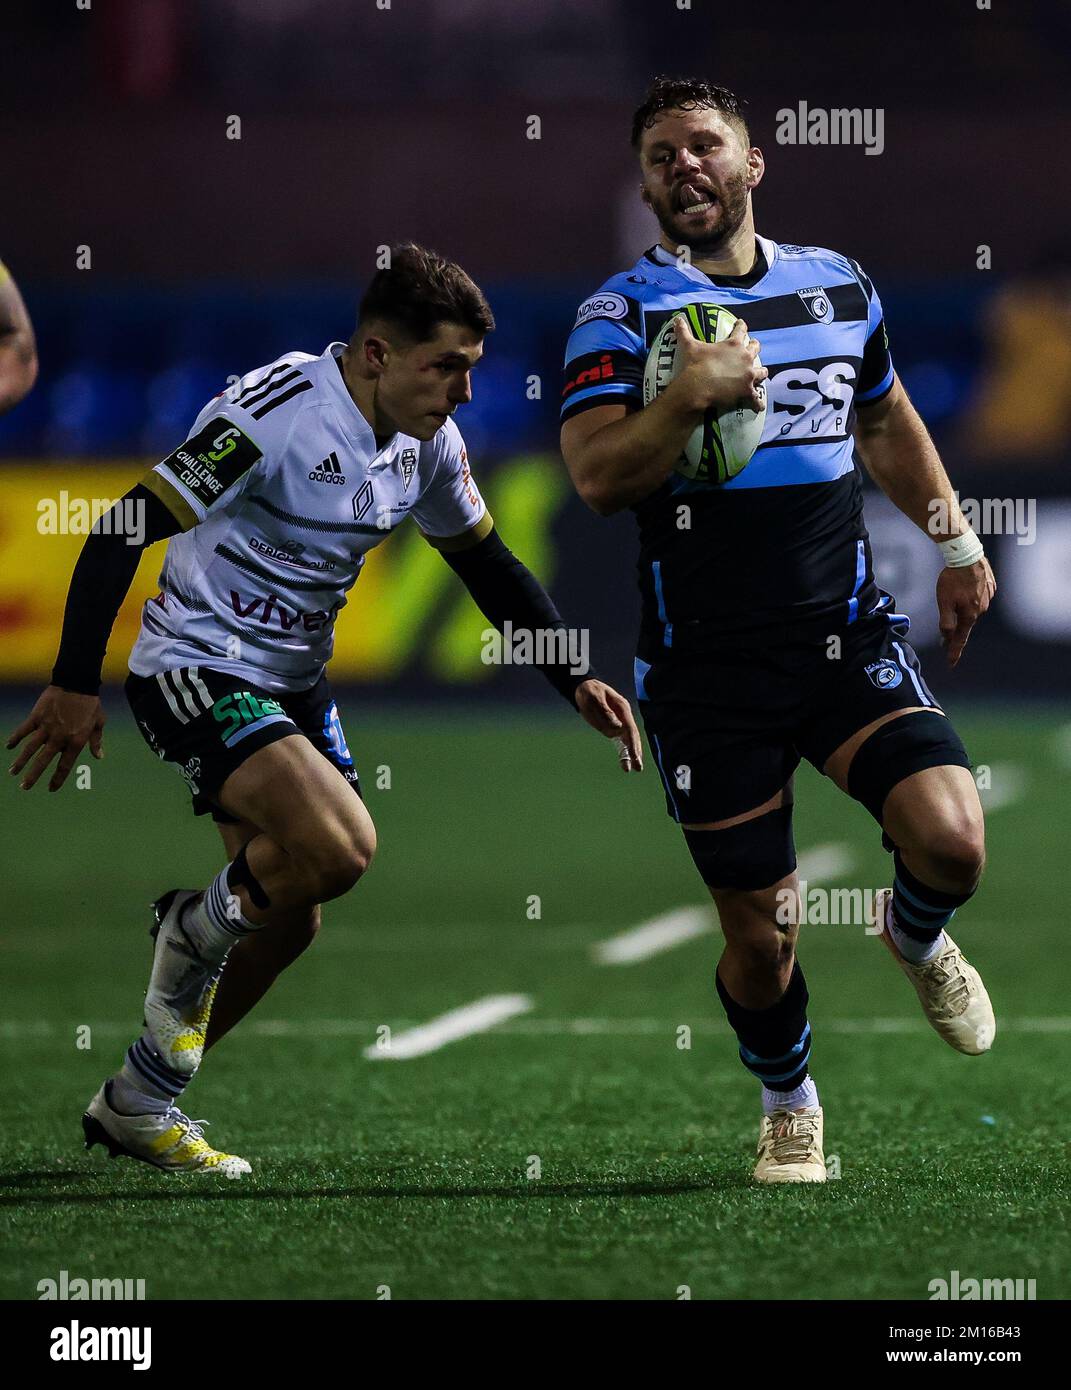 Cardiff Rugby's Thomas Young and CA Brive's Mathis Ferte in action during the EPCR Challenge Cup match at the Cardiff Arms Park, Cardiff. Picture date: Saturday December 10, 2022. Stock Photo